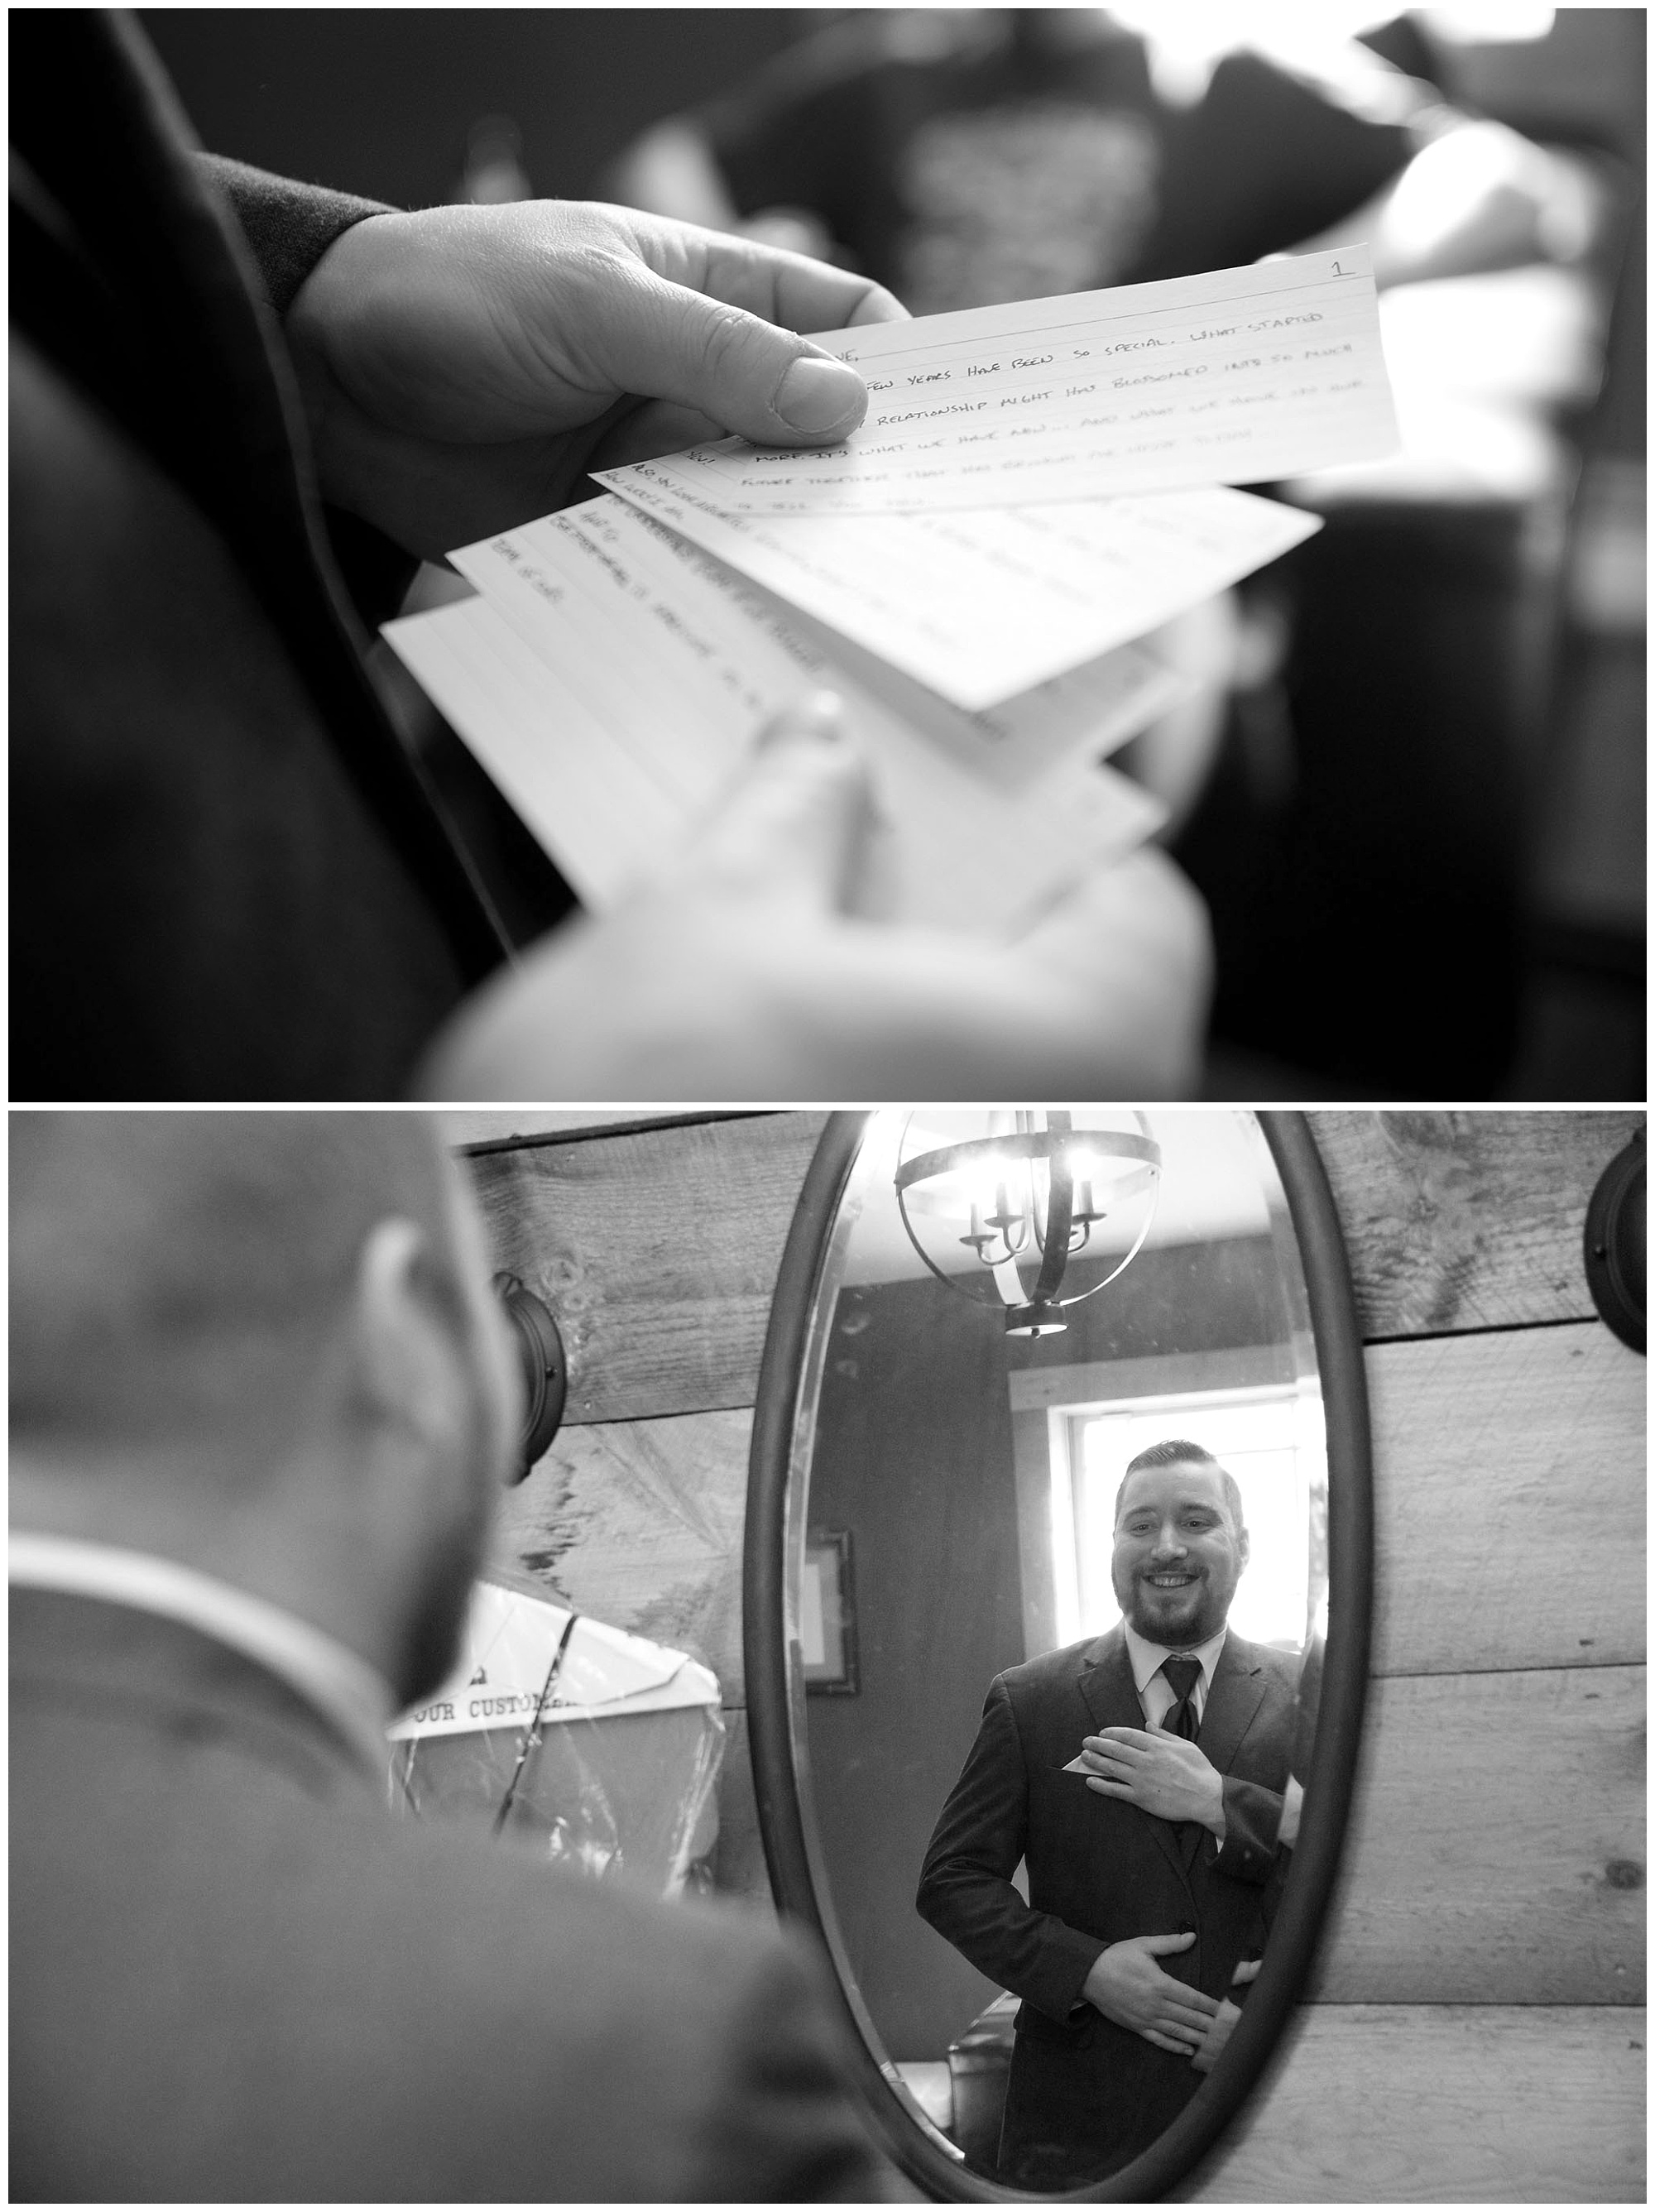 Two photos. One a close up of a groom reviewing his vows written on note cards. A second of him adjusting his suit jacket while looking in a mirror.